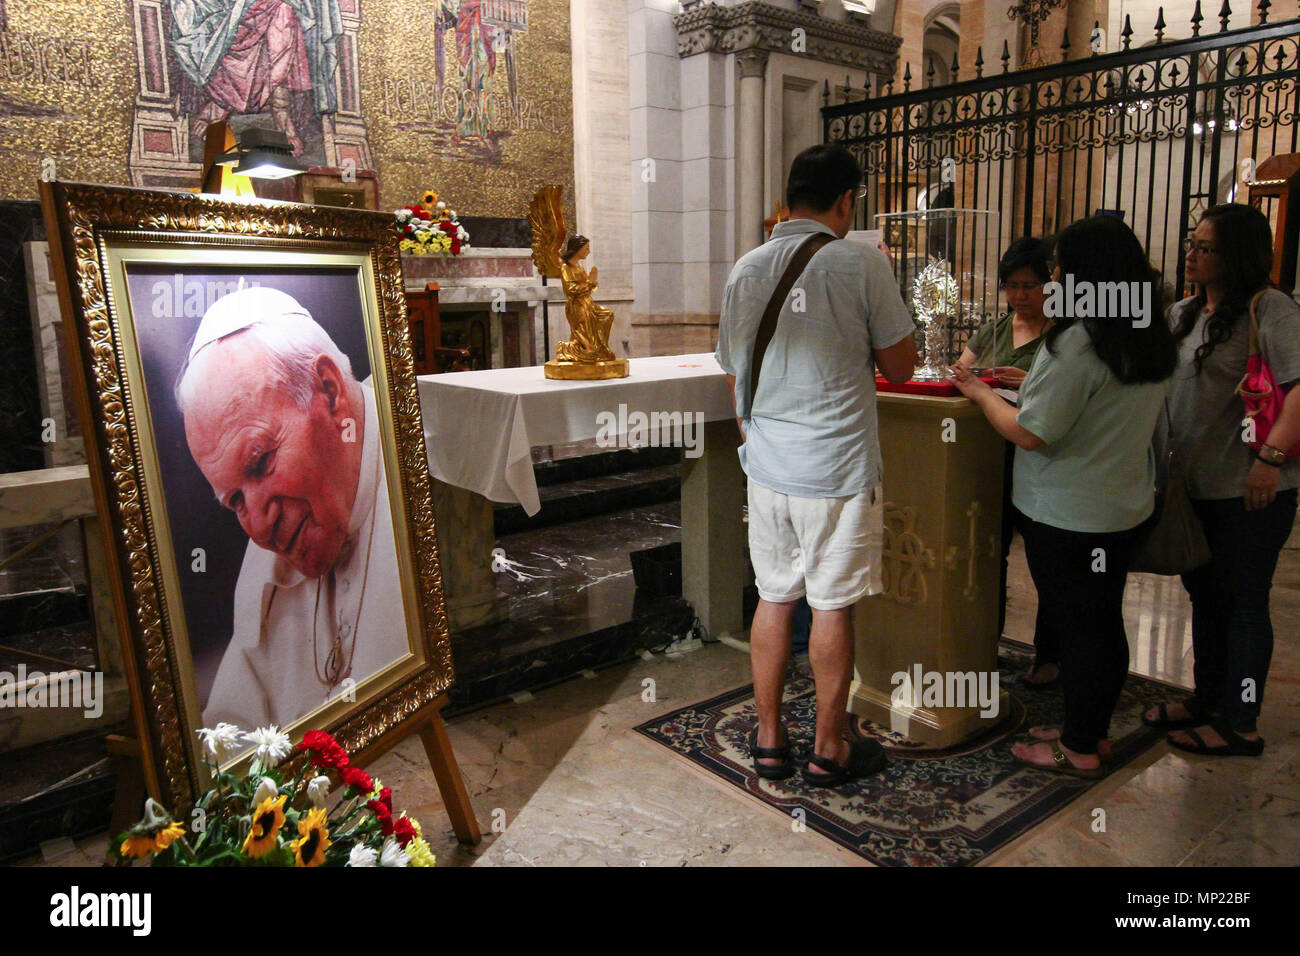 Manila, Philippines. 20th May 2018. Devotees pray as they touch the glass encasement of the blood reliquary. The Manila Cathedral in Intramuros displayed the blood relic of Pope John Paul II for public veneration. The blood was extracted from Pope John Paul II during his battle from Parkinson's disease, in case the Pope needed an emergency transfusion. Credit: SOPA Images Limited/Alamy Live News Stock Photo